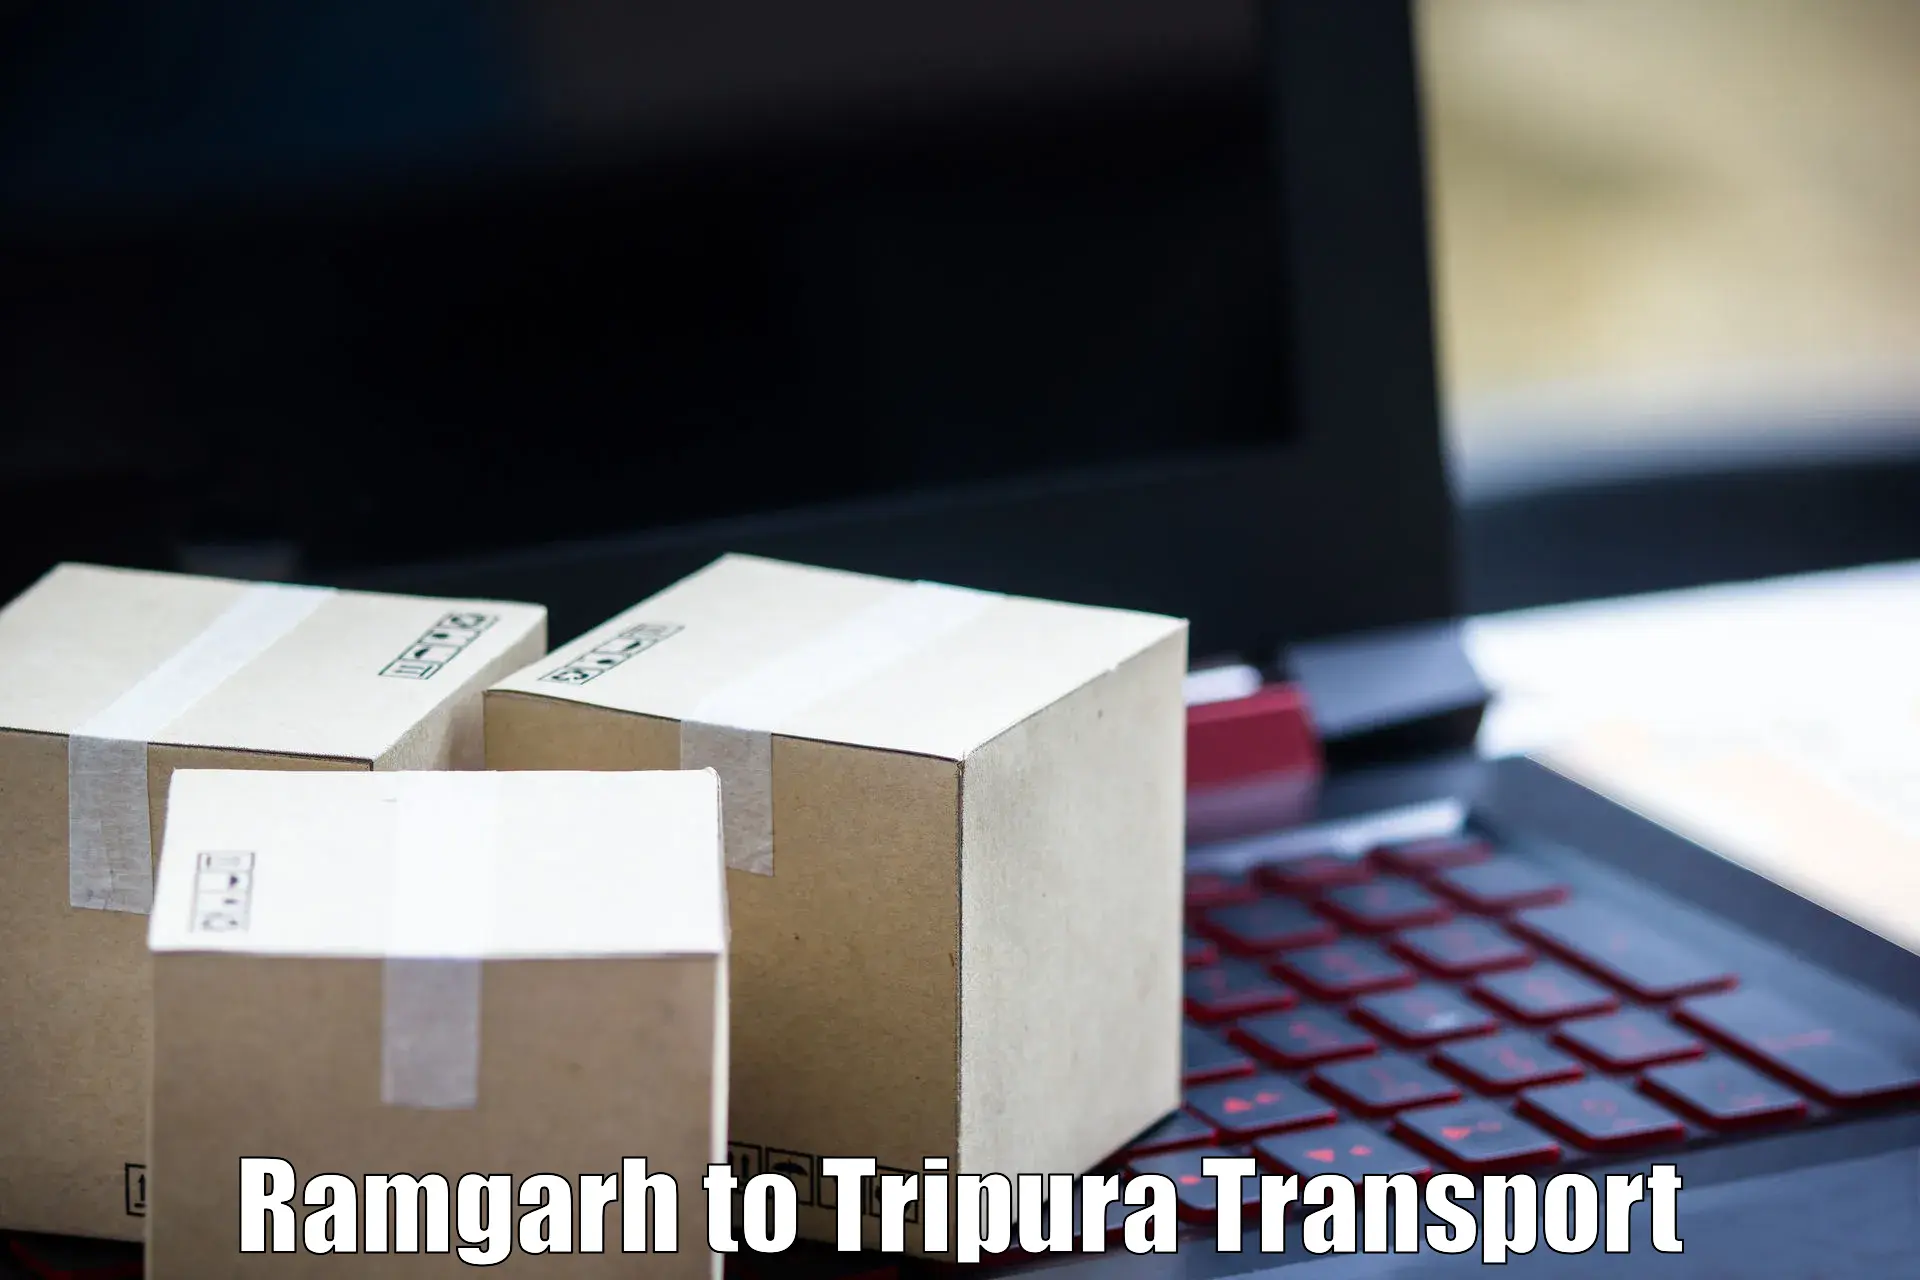 Land transport services in Ramgarh to Udaipur Tripura